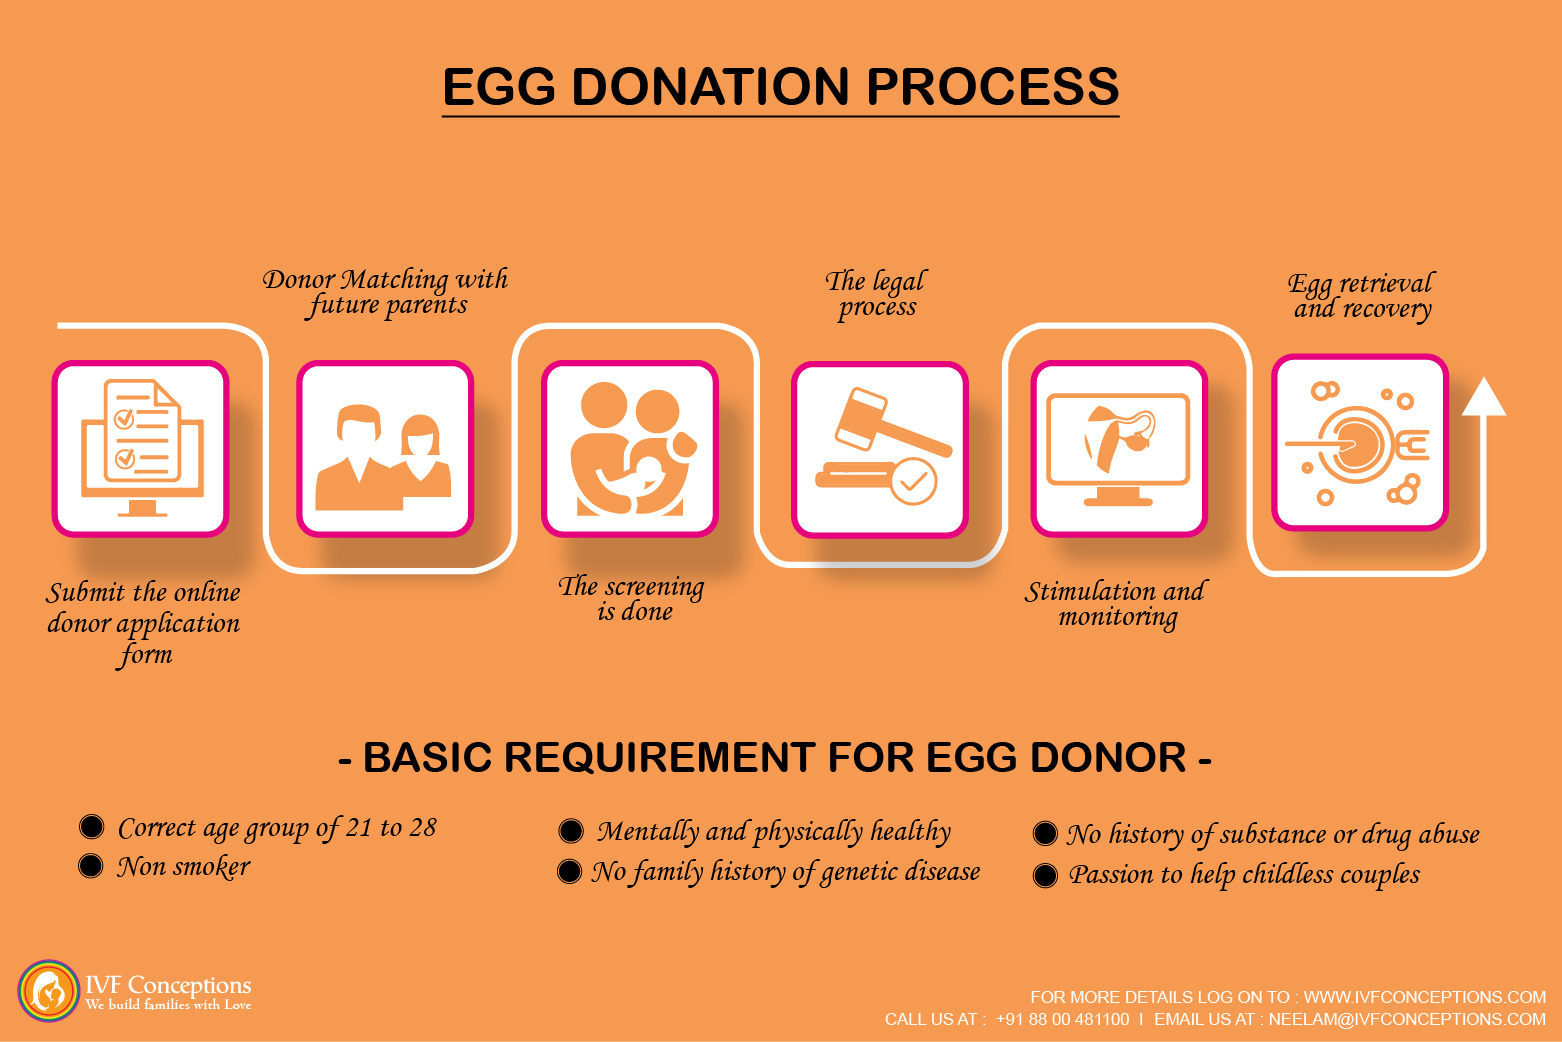 How long does the egg donation process take?